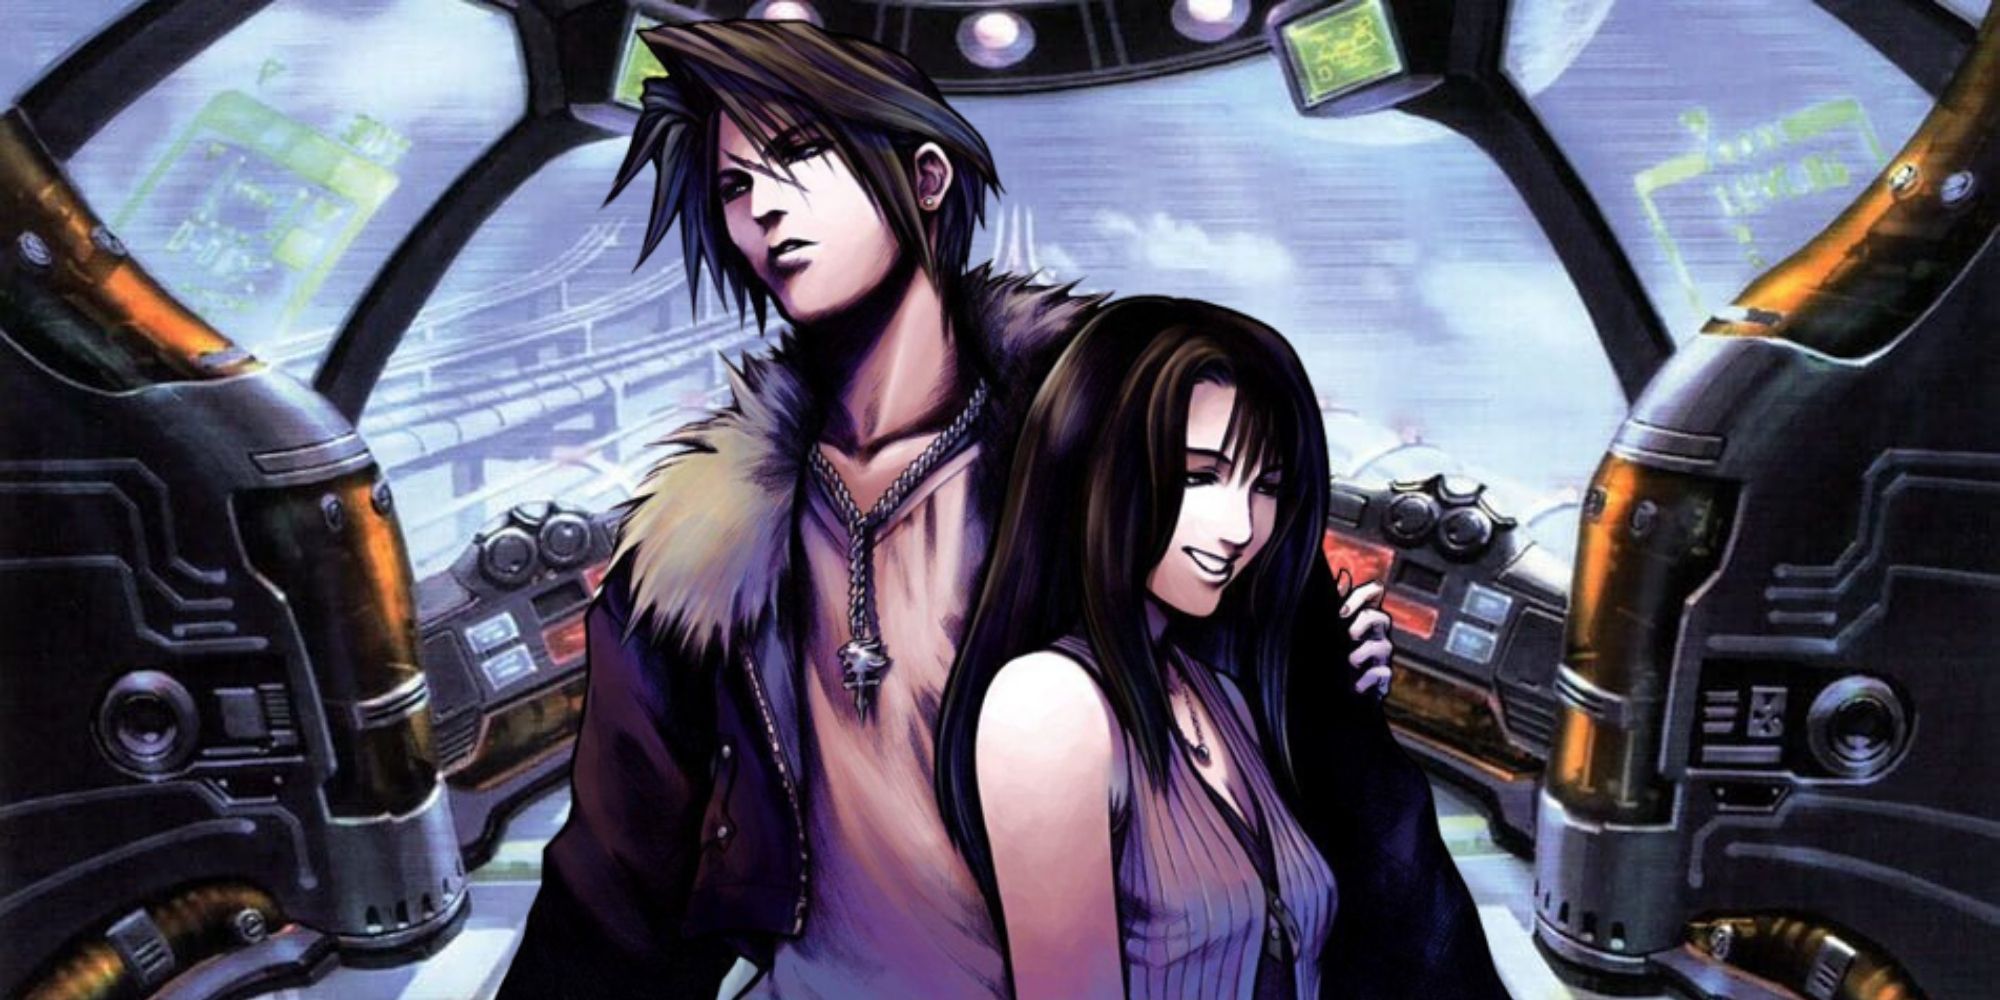 Squall and Rinoa stand side by side